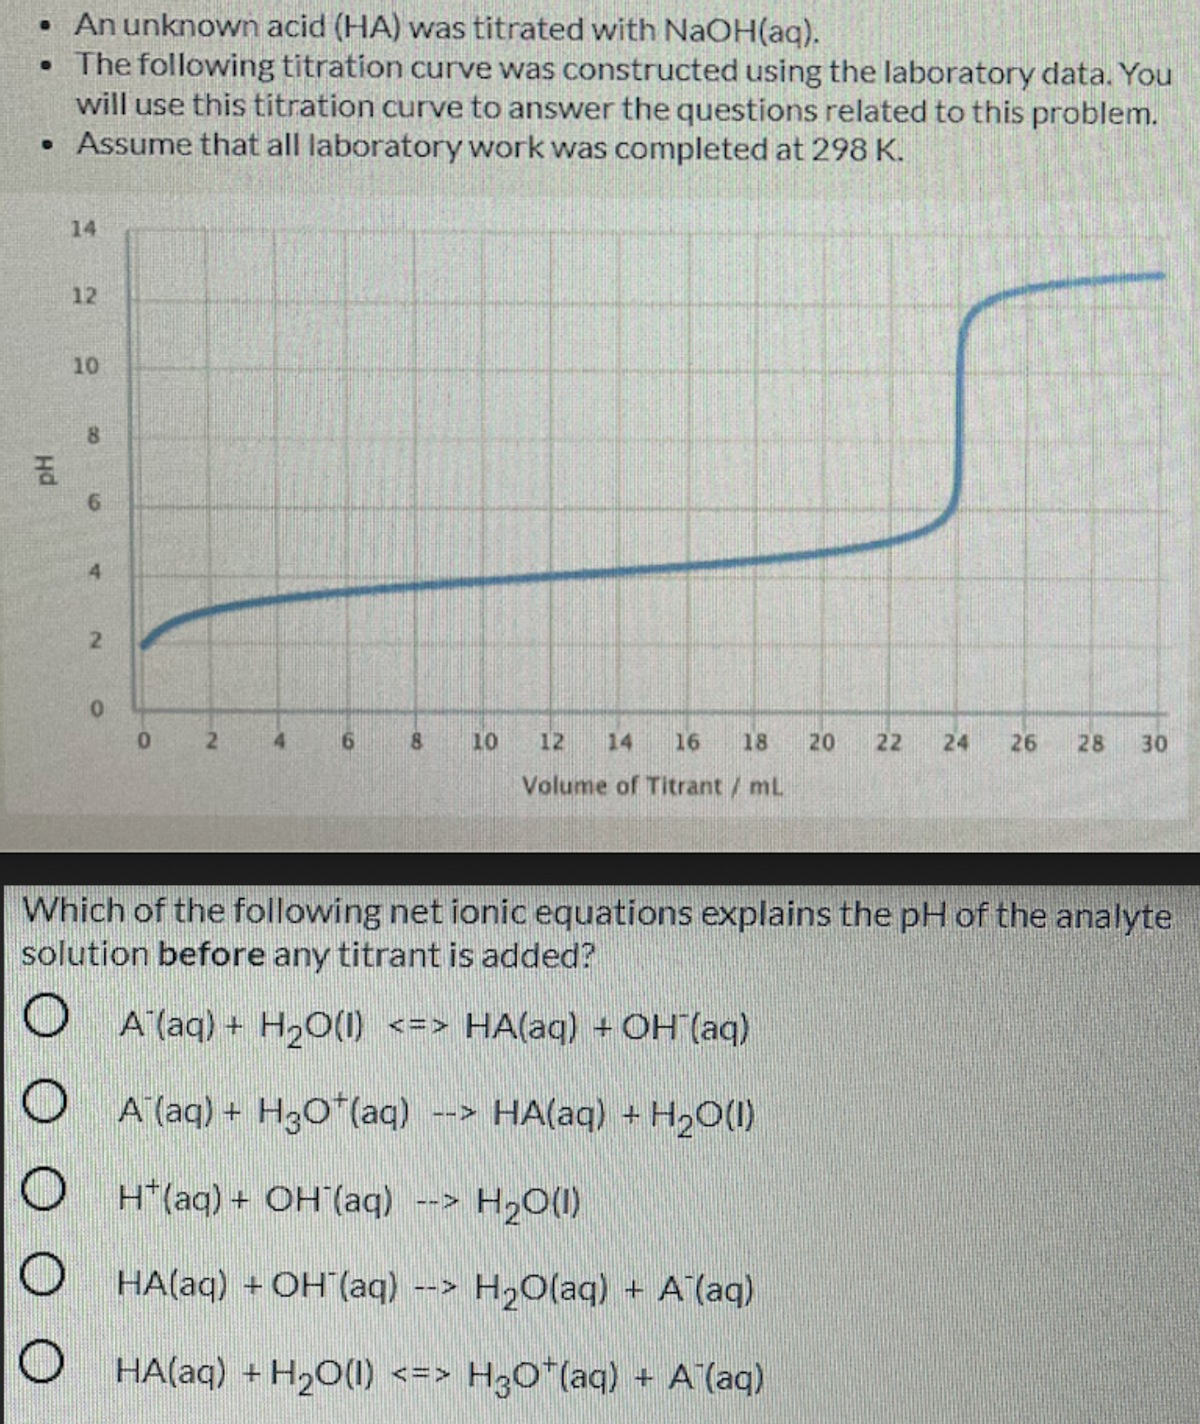 • An unknown acid (HA) was titrated with NaOH(aq).
• The following titration curve was constructed using the laboratory data. You
will use this titration curve to answer the questions related to this problem.
• Assume that all laboratory work was completed at 298 K.
14
12
10
6.
4.
2.
4
9.
8.
10
12
14
16
18
20
22
24
26
28
30
Volume of Titrant / mL
Which of the following net ionic equations explains the pH of the analyte
solution before any titrant is added?
A (aq) + H20(1)
<=> HA(aq) + OH (aq)
A (aq) + H3O*(aq) --> HA(aq) + H20(1)
O H*(aq) + OH (aq)
H20(1)
-->
O HA(aq) + OH (aq)
--> H2O(aq) + A (aq)
HA(aq) + H20() <=> H3O*(aq) + A (aq)
